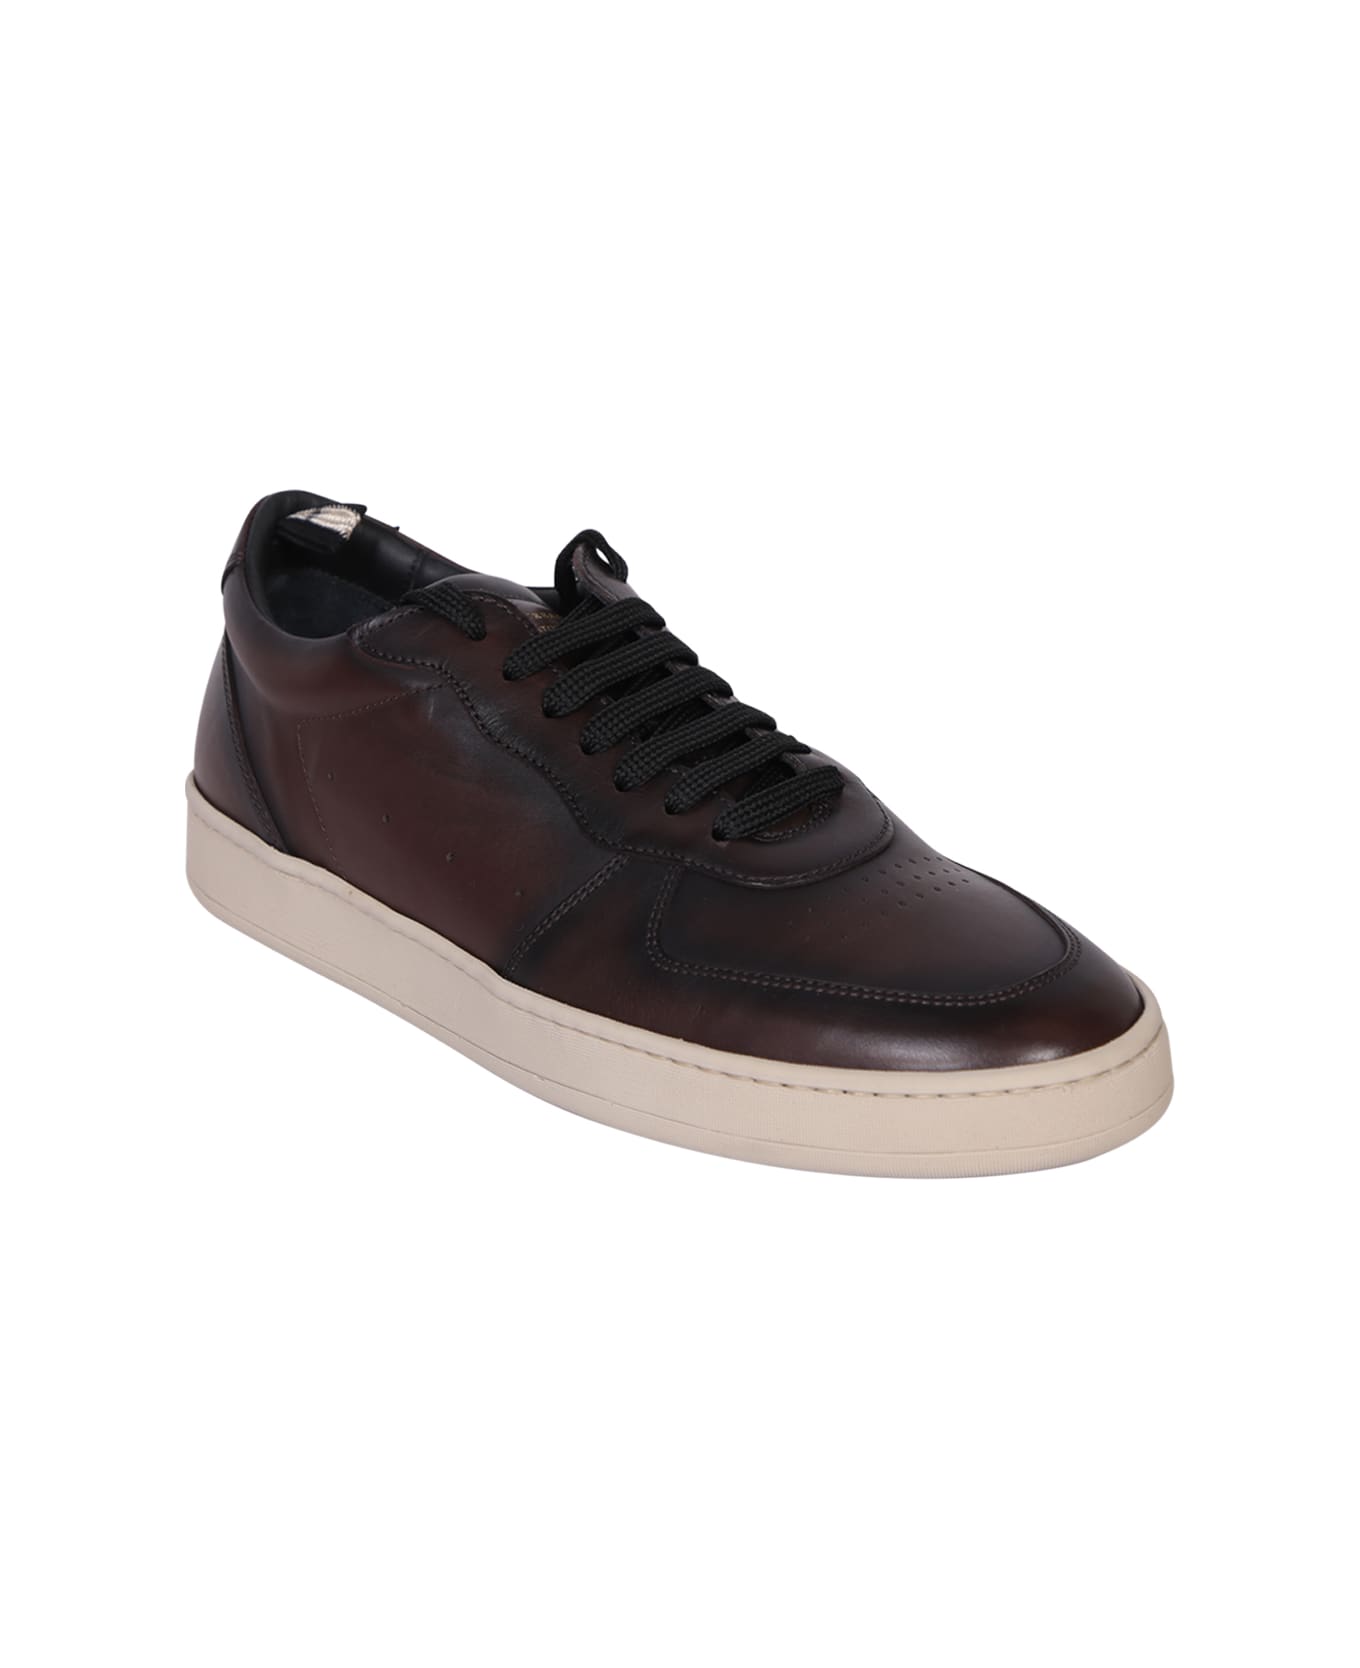 Officine Creative Asset 001 Brown Leather - Brown